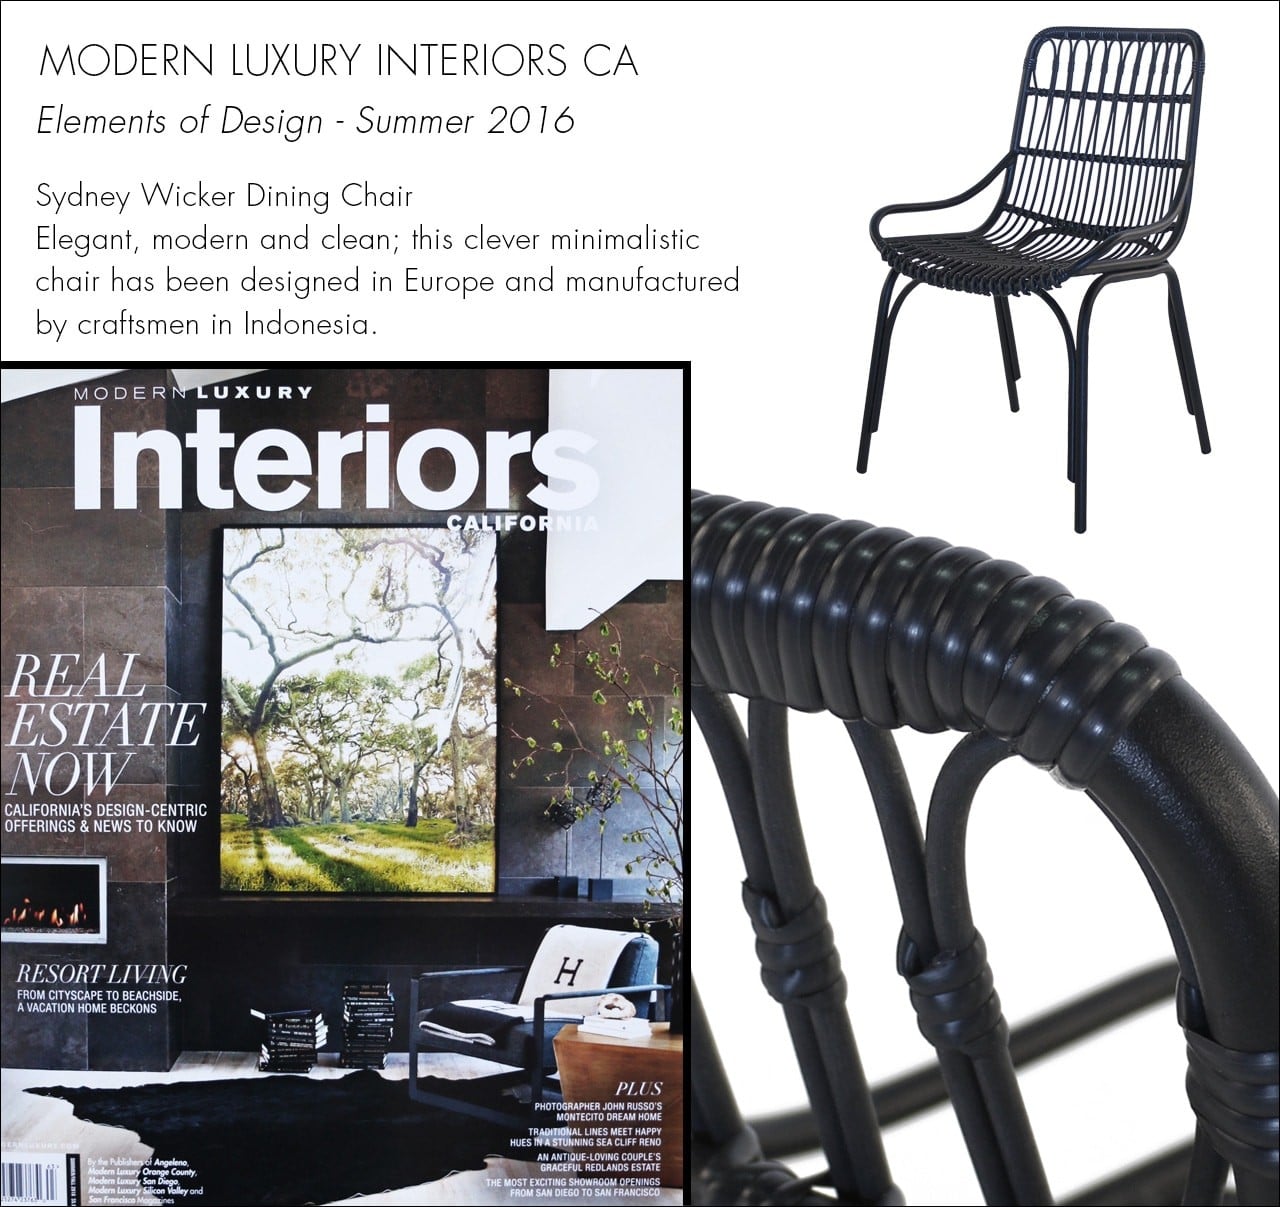 Sydney Outdoor Wicker Dining Chair featured in Modern Luxury Interiors California